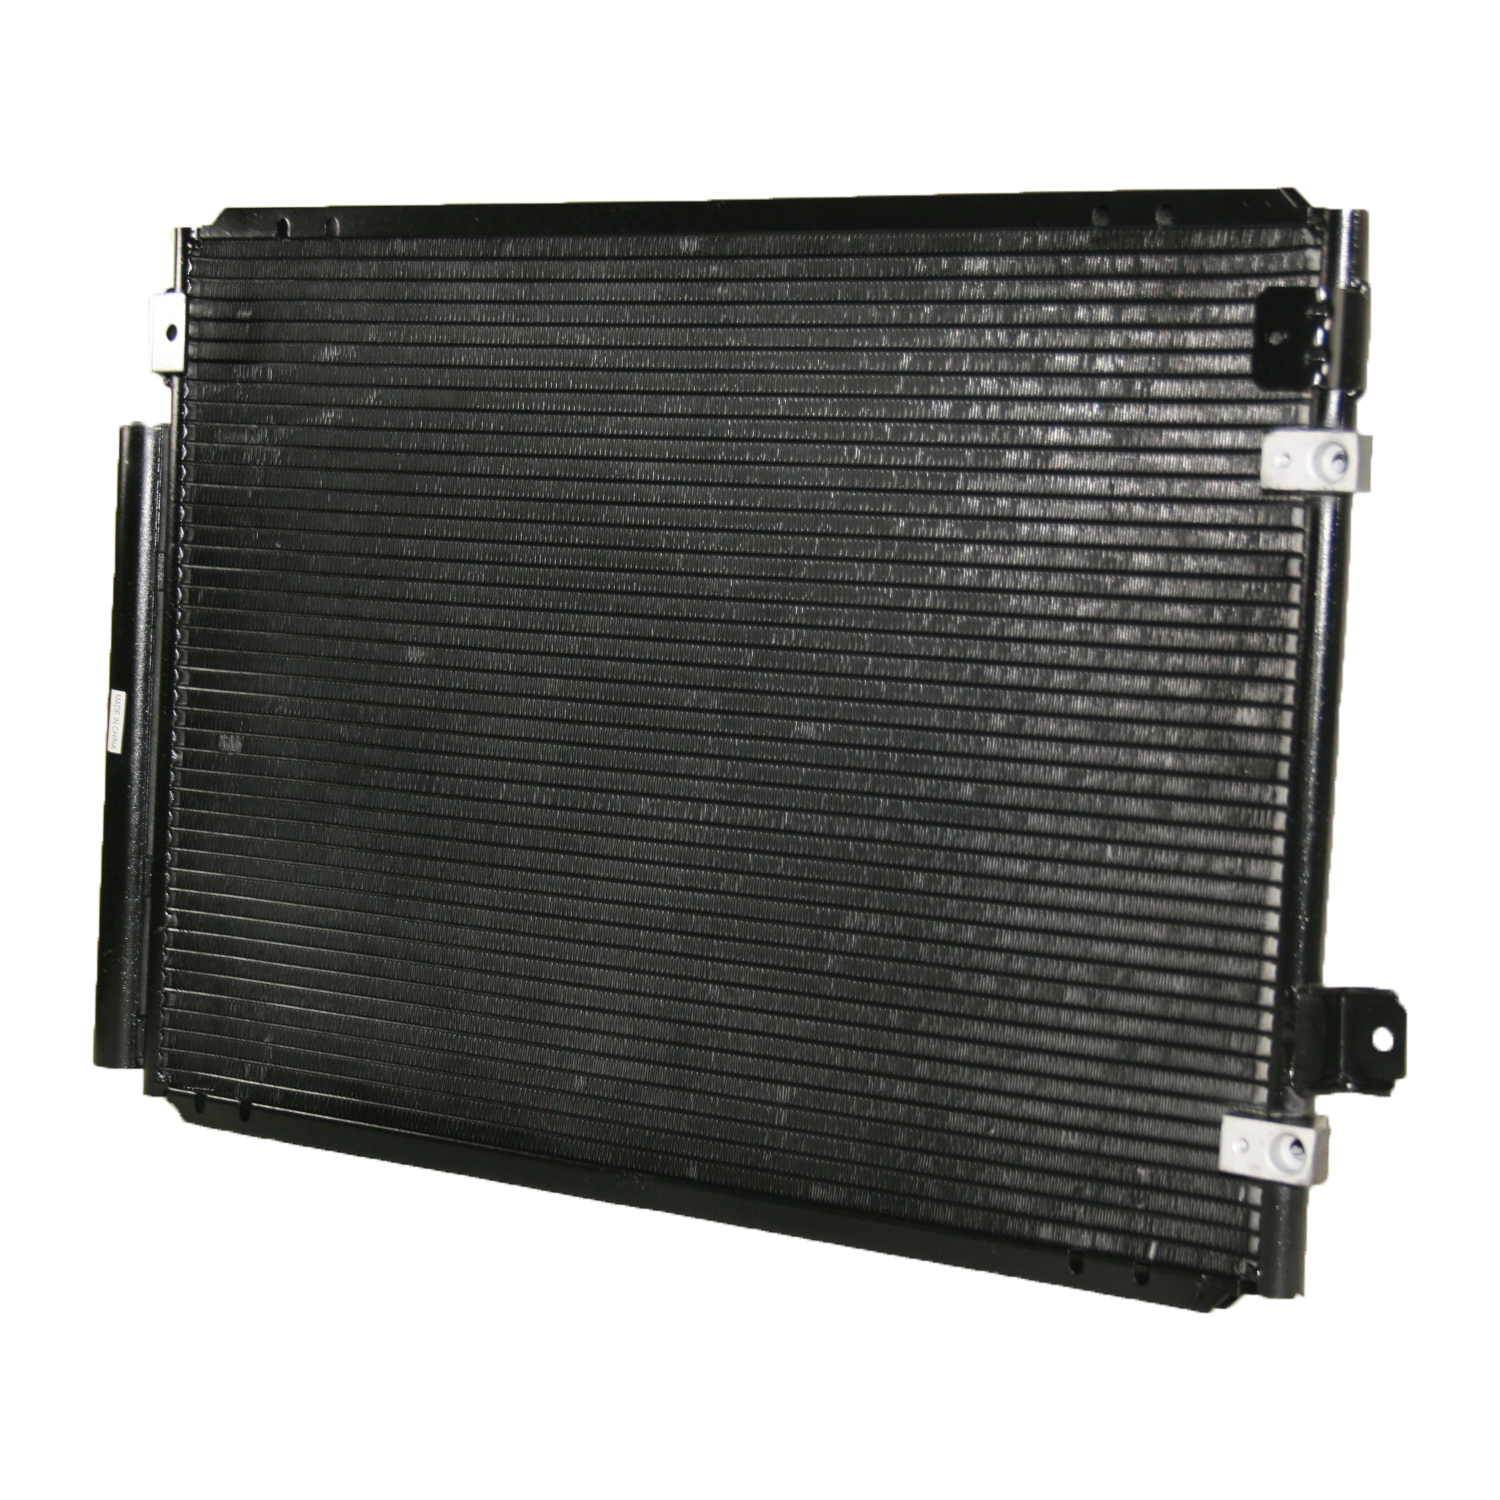 TCW Condenser 44-3101 New Product Image field_60b6a13a6e67c